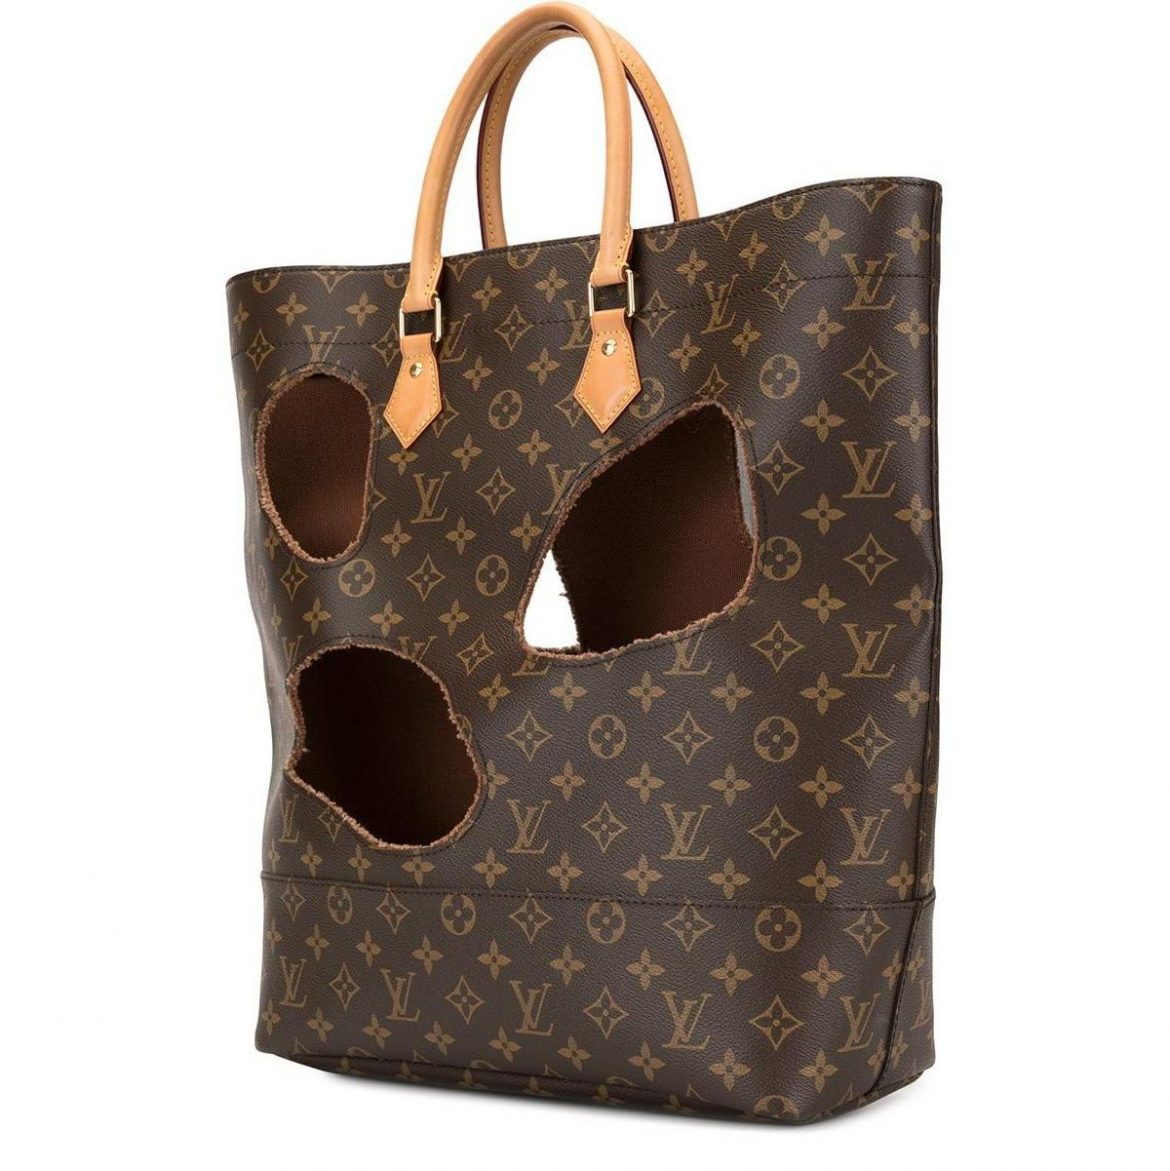 cost of louis vuitton purse